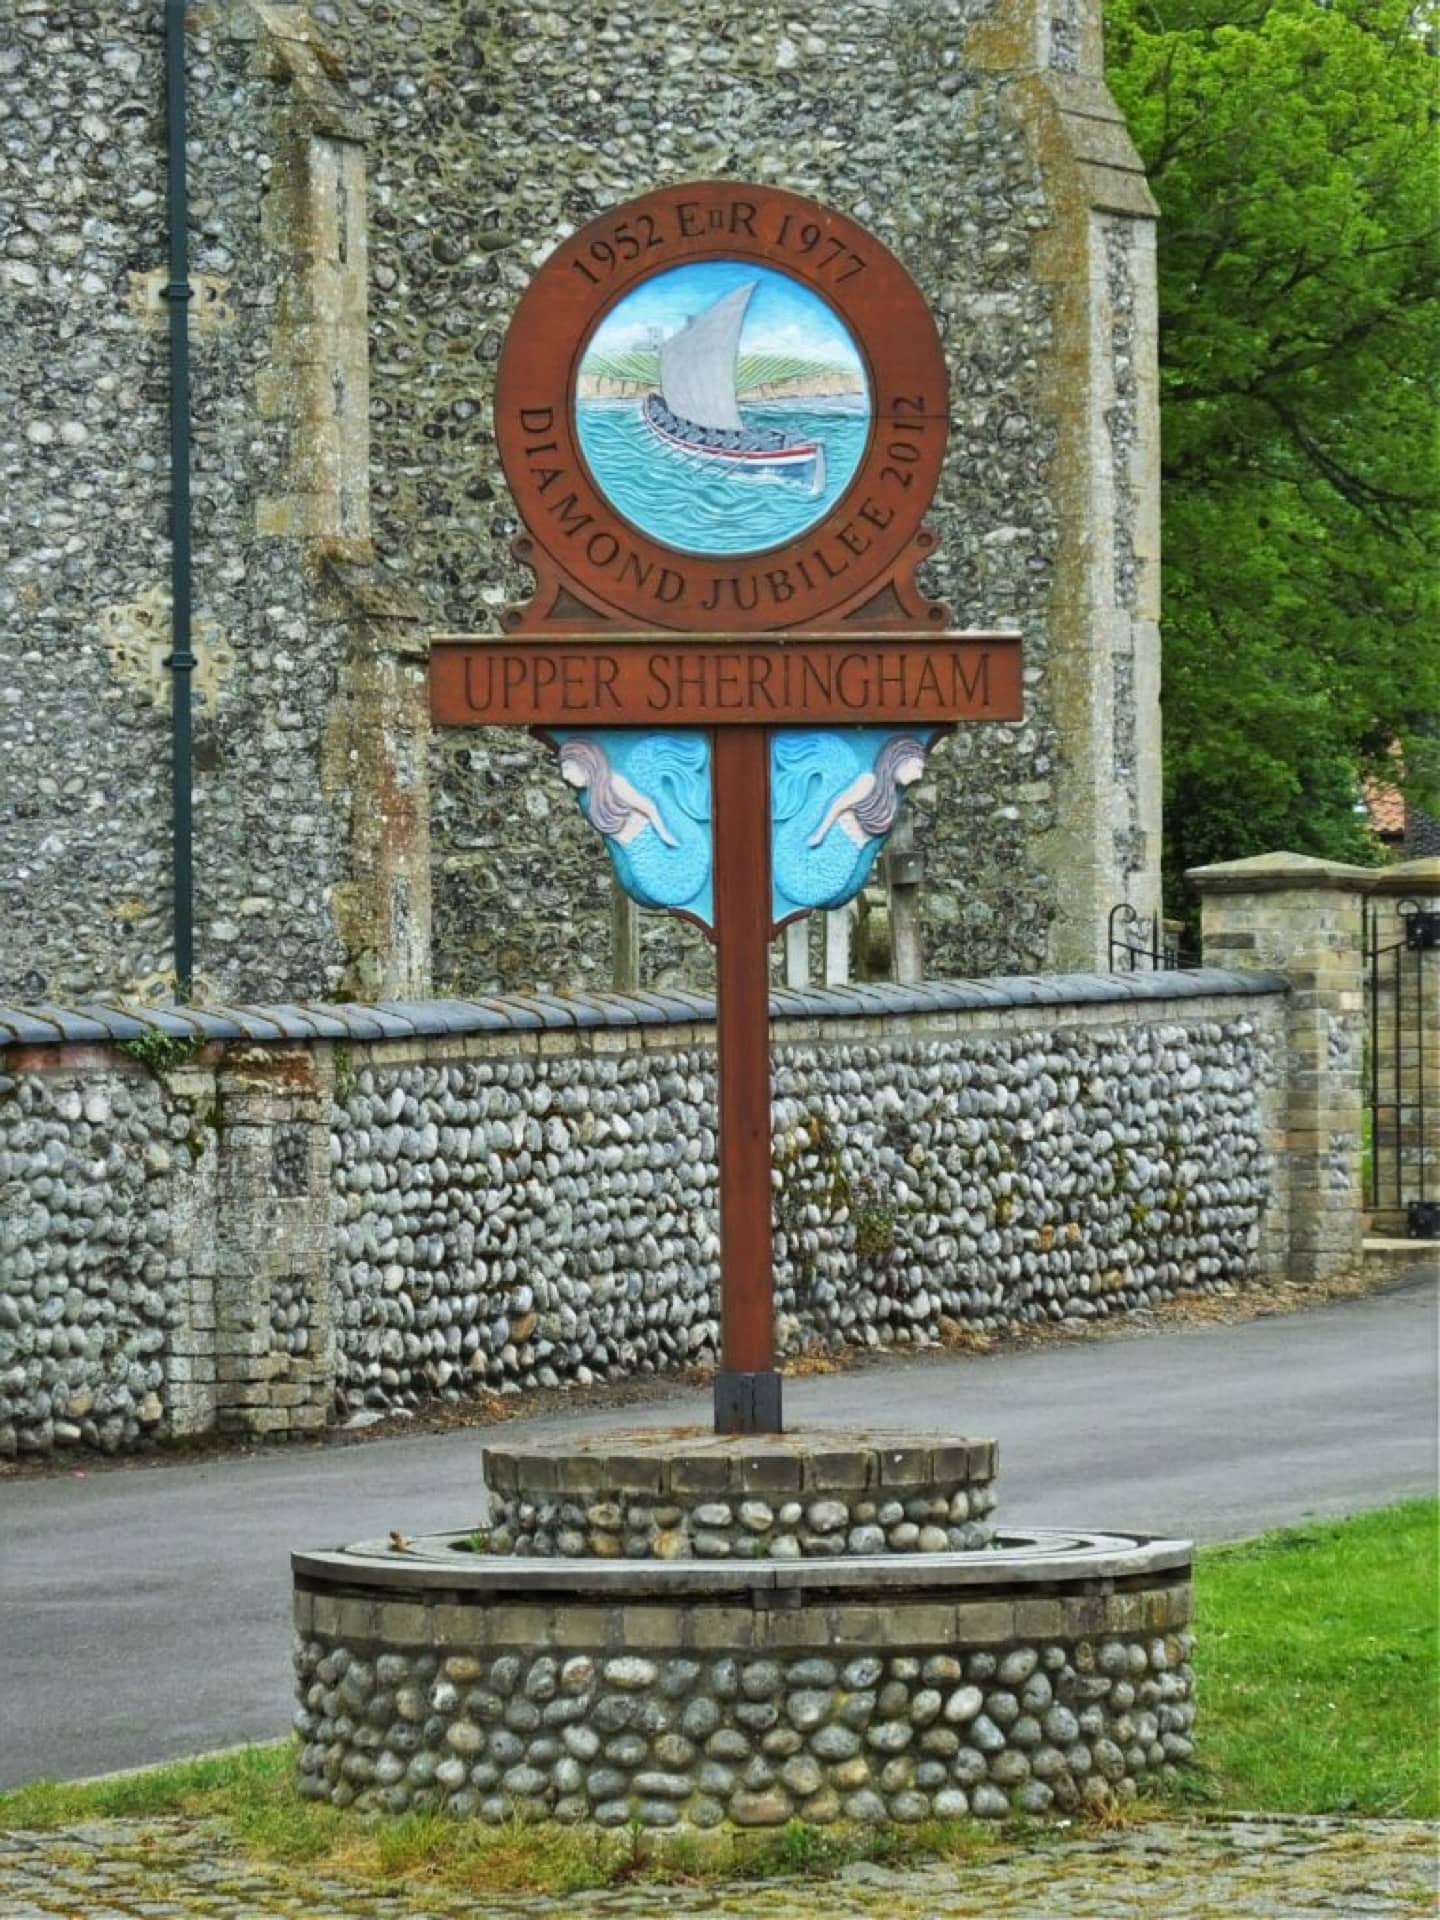 The sign for Upper Sheringham next to a stone church.